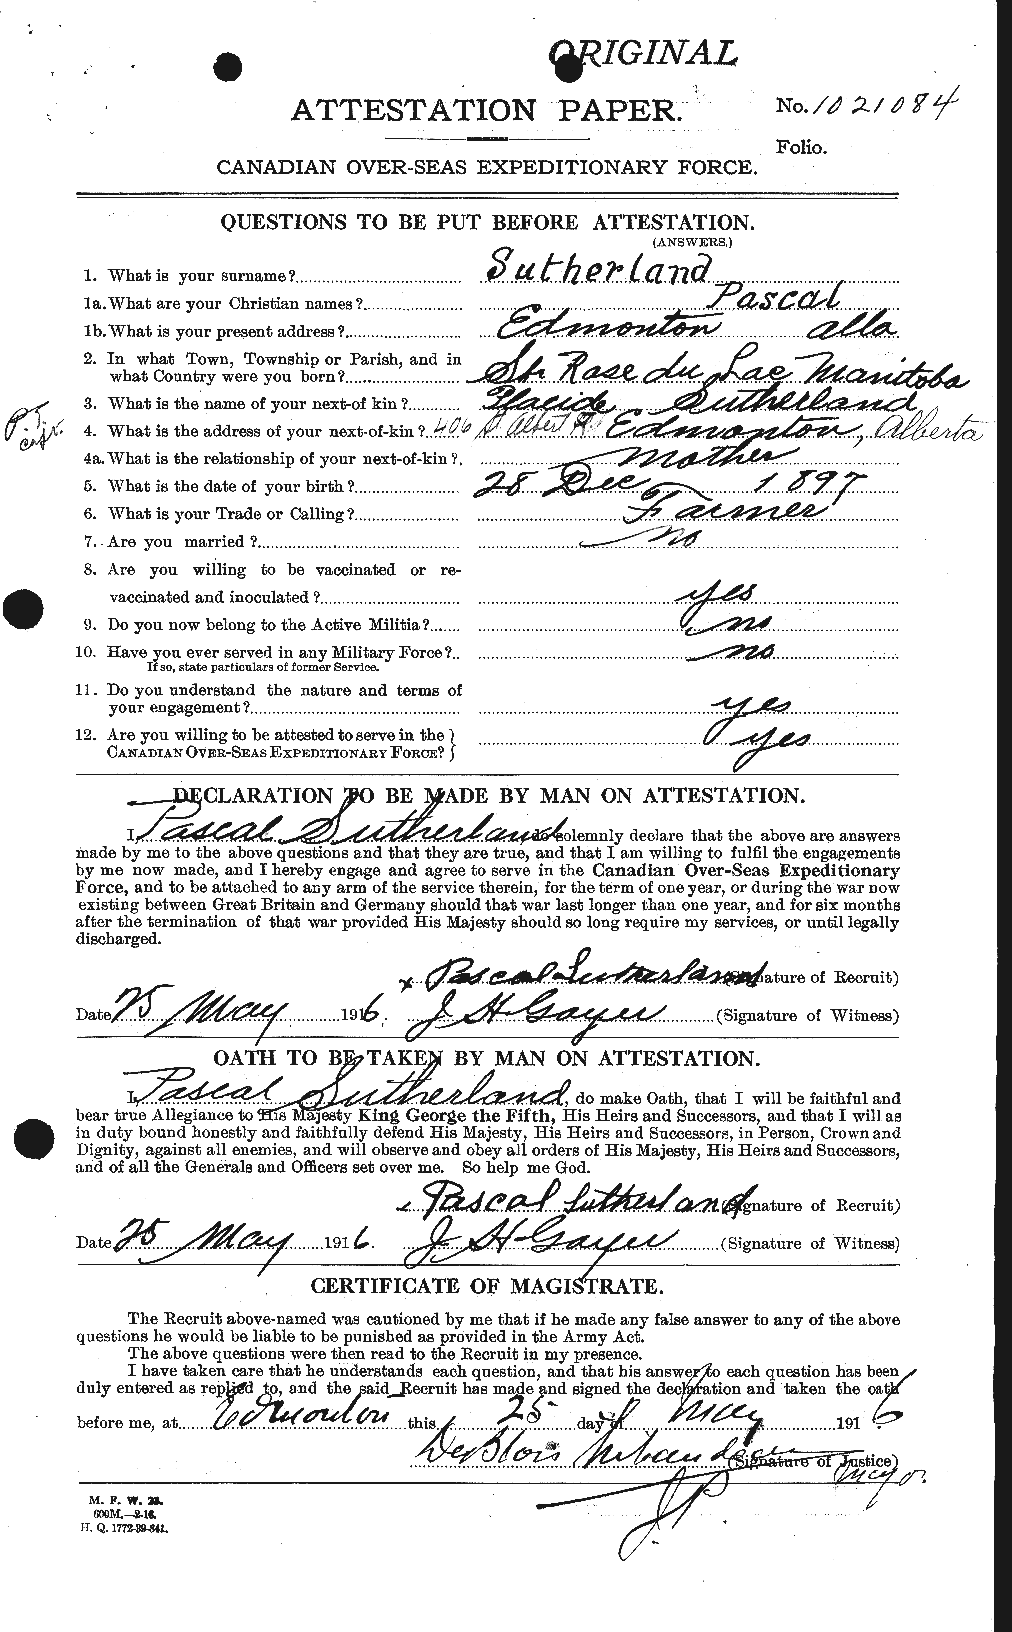 Personnel Records of the First World War - CEF 624663a